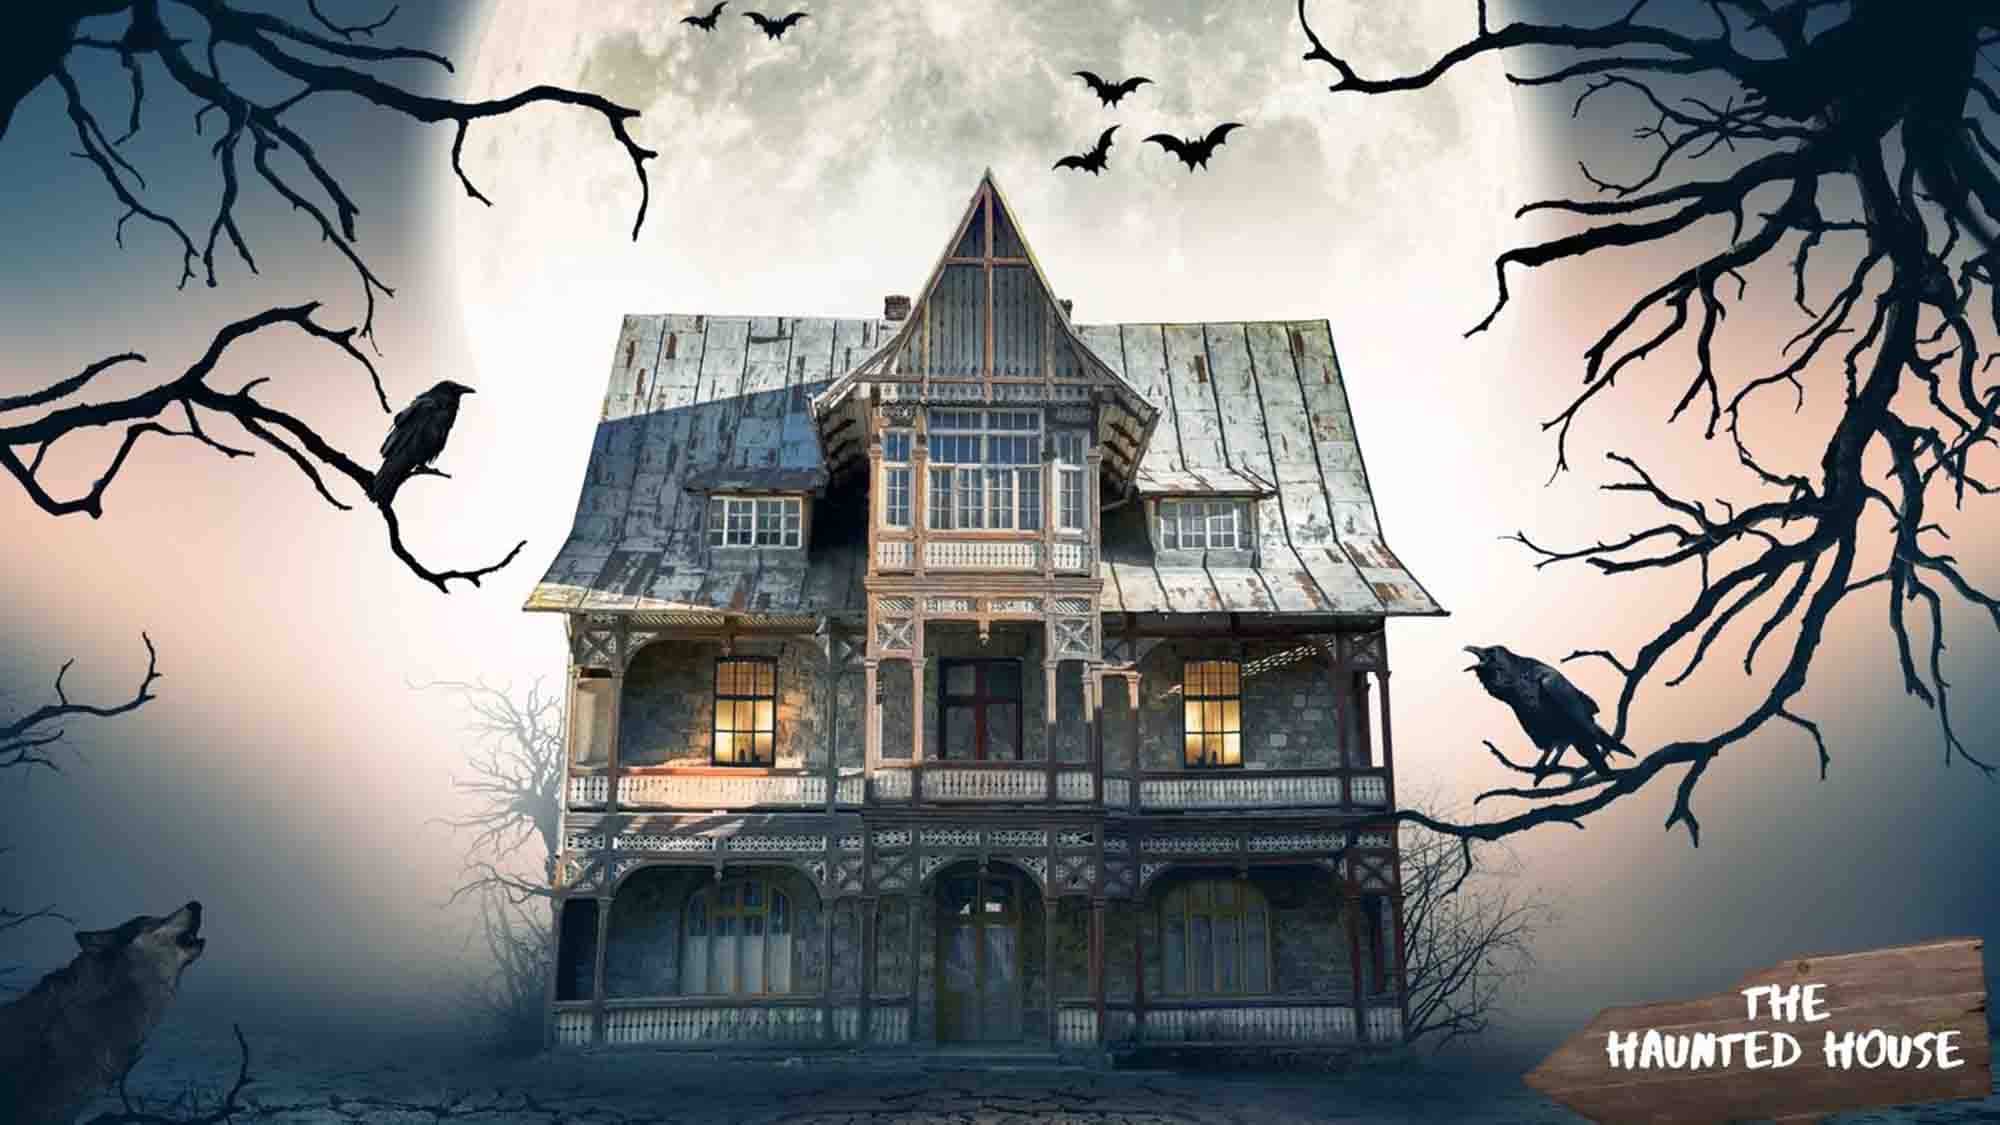 Escape the Haunted House